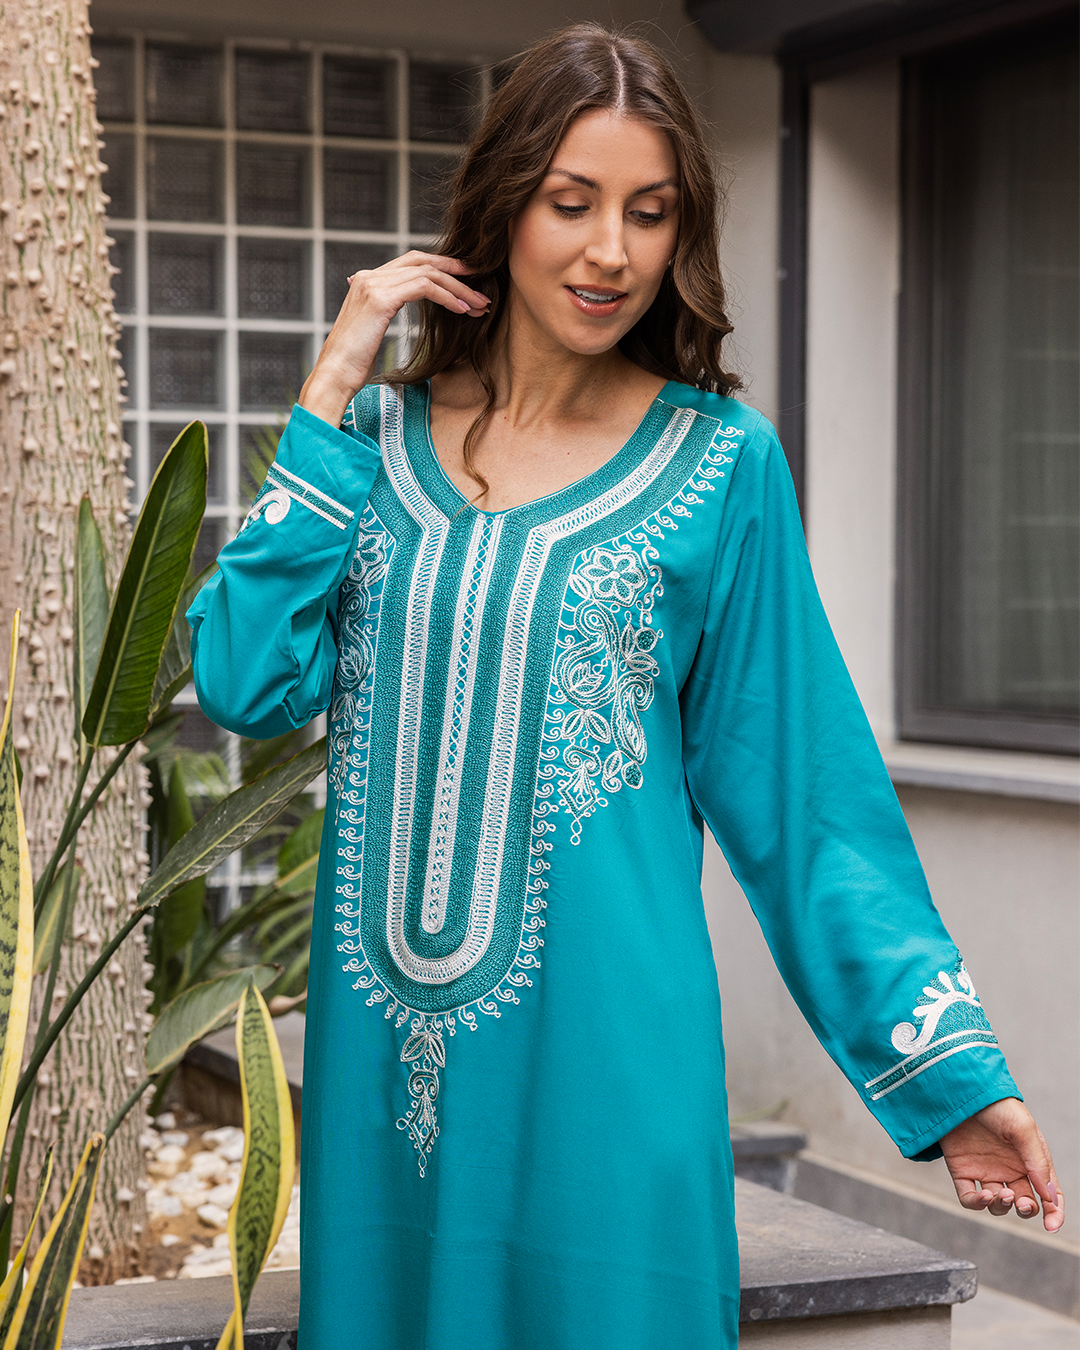 1 plain viscose dacron shirt with embroidered sleeves